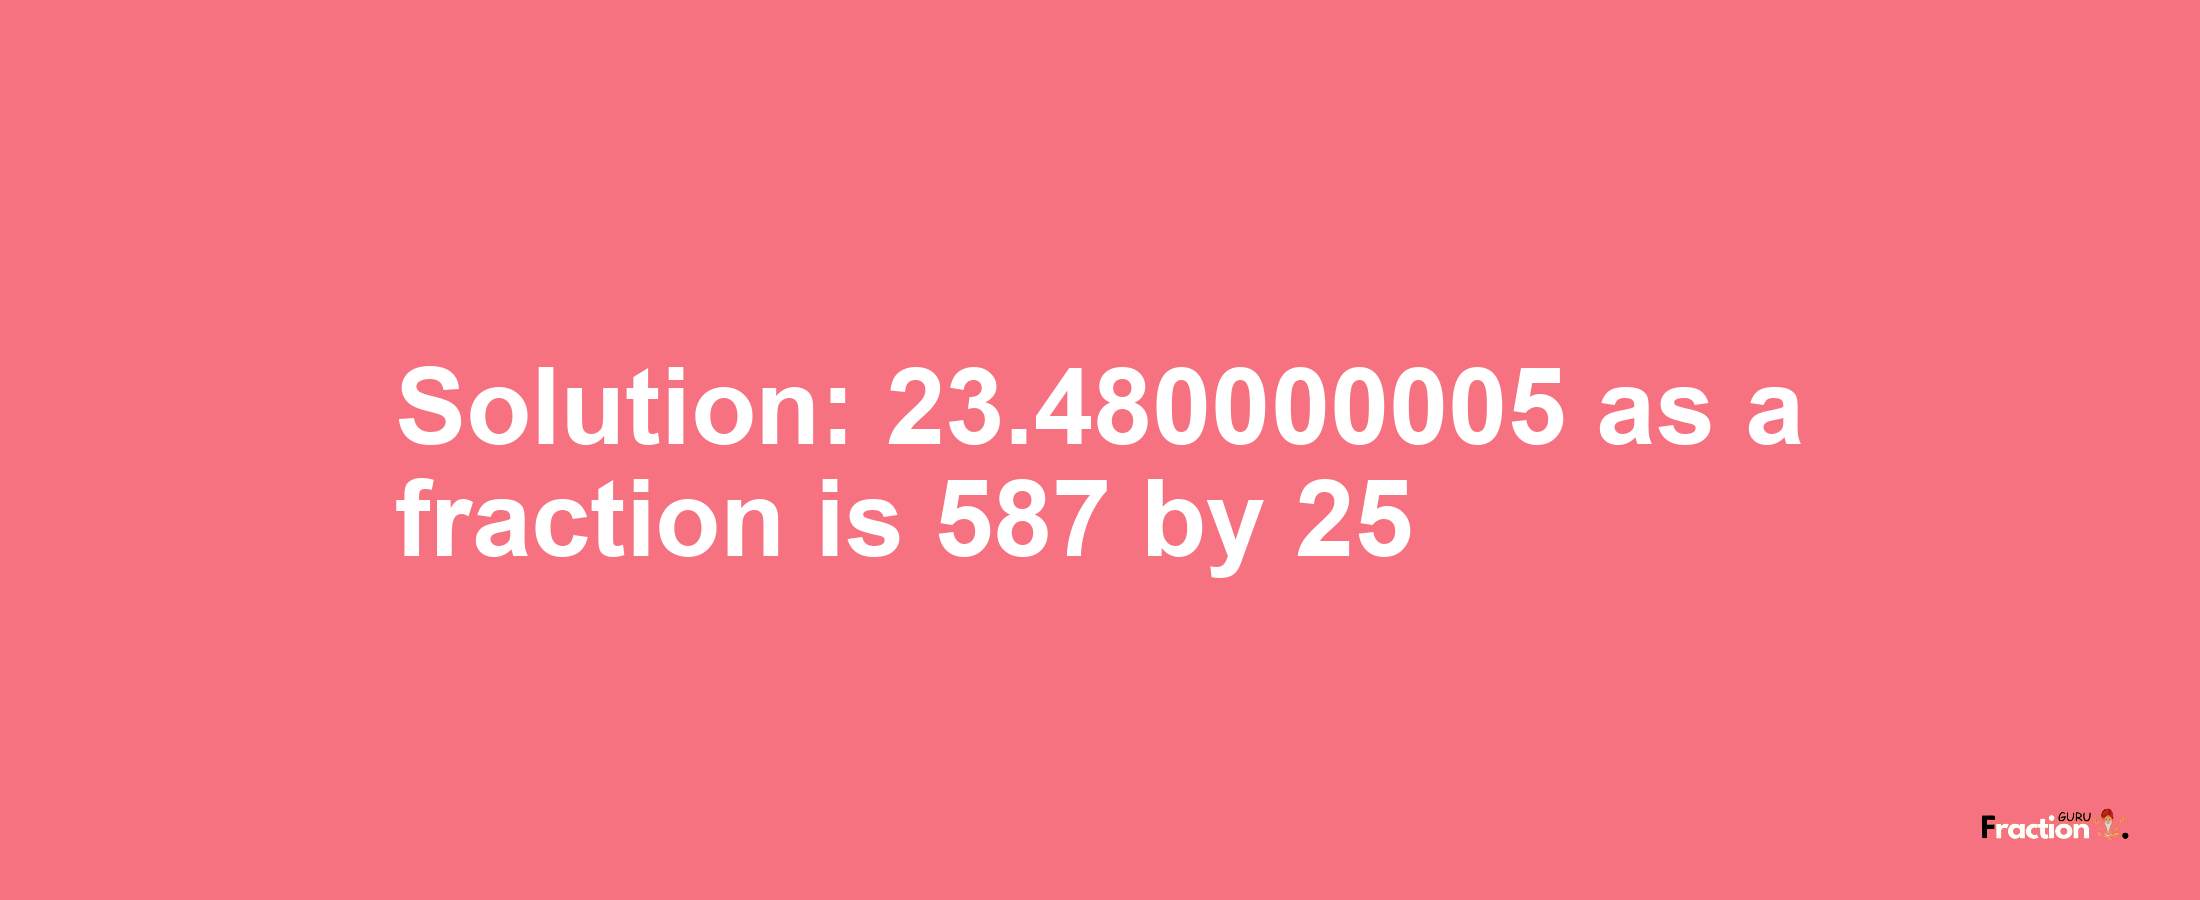 Solution:23.480000005 as a fraction is 587/25